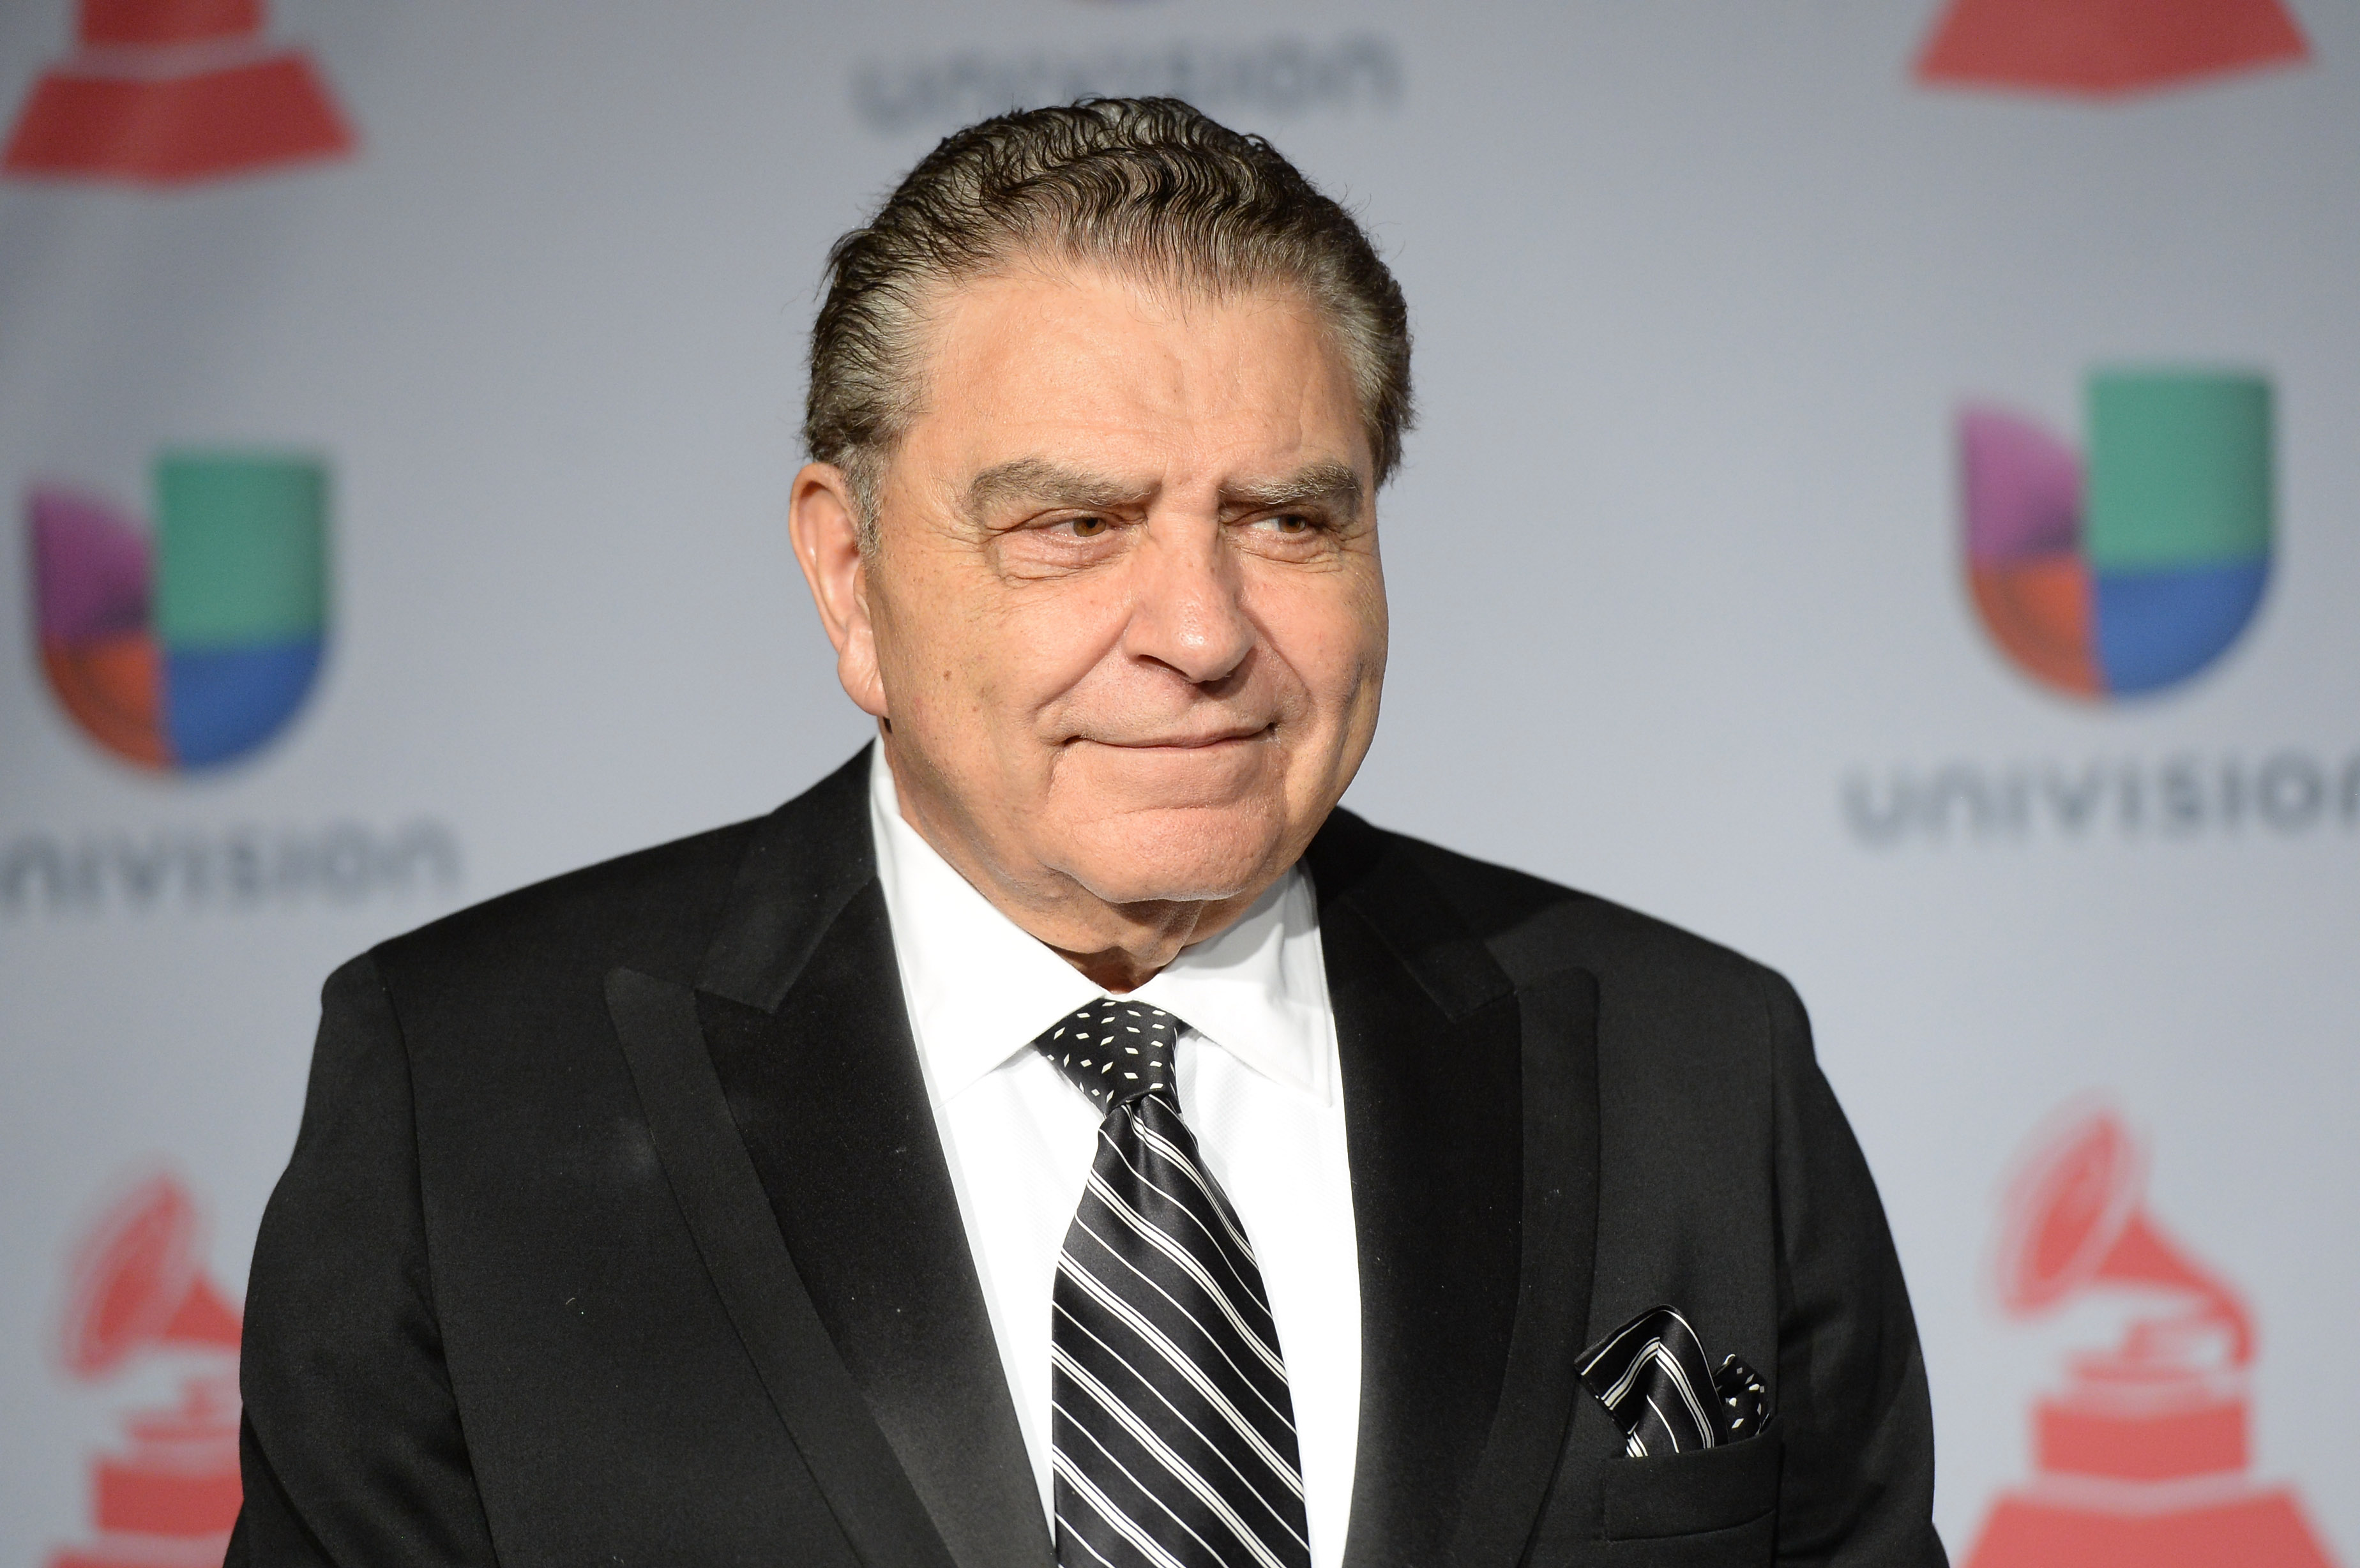 LAS VEGAS, NV - NOVEMBER 21:  TV personality Don Francisco poses in the press room at the 14th Annual Latin GRAMMY Awards held at the Mandalay Bay Events Center on November 21, 2013 in Las Vegas, Nevada.  (Photo by Jason Merritt/Getty Images)